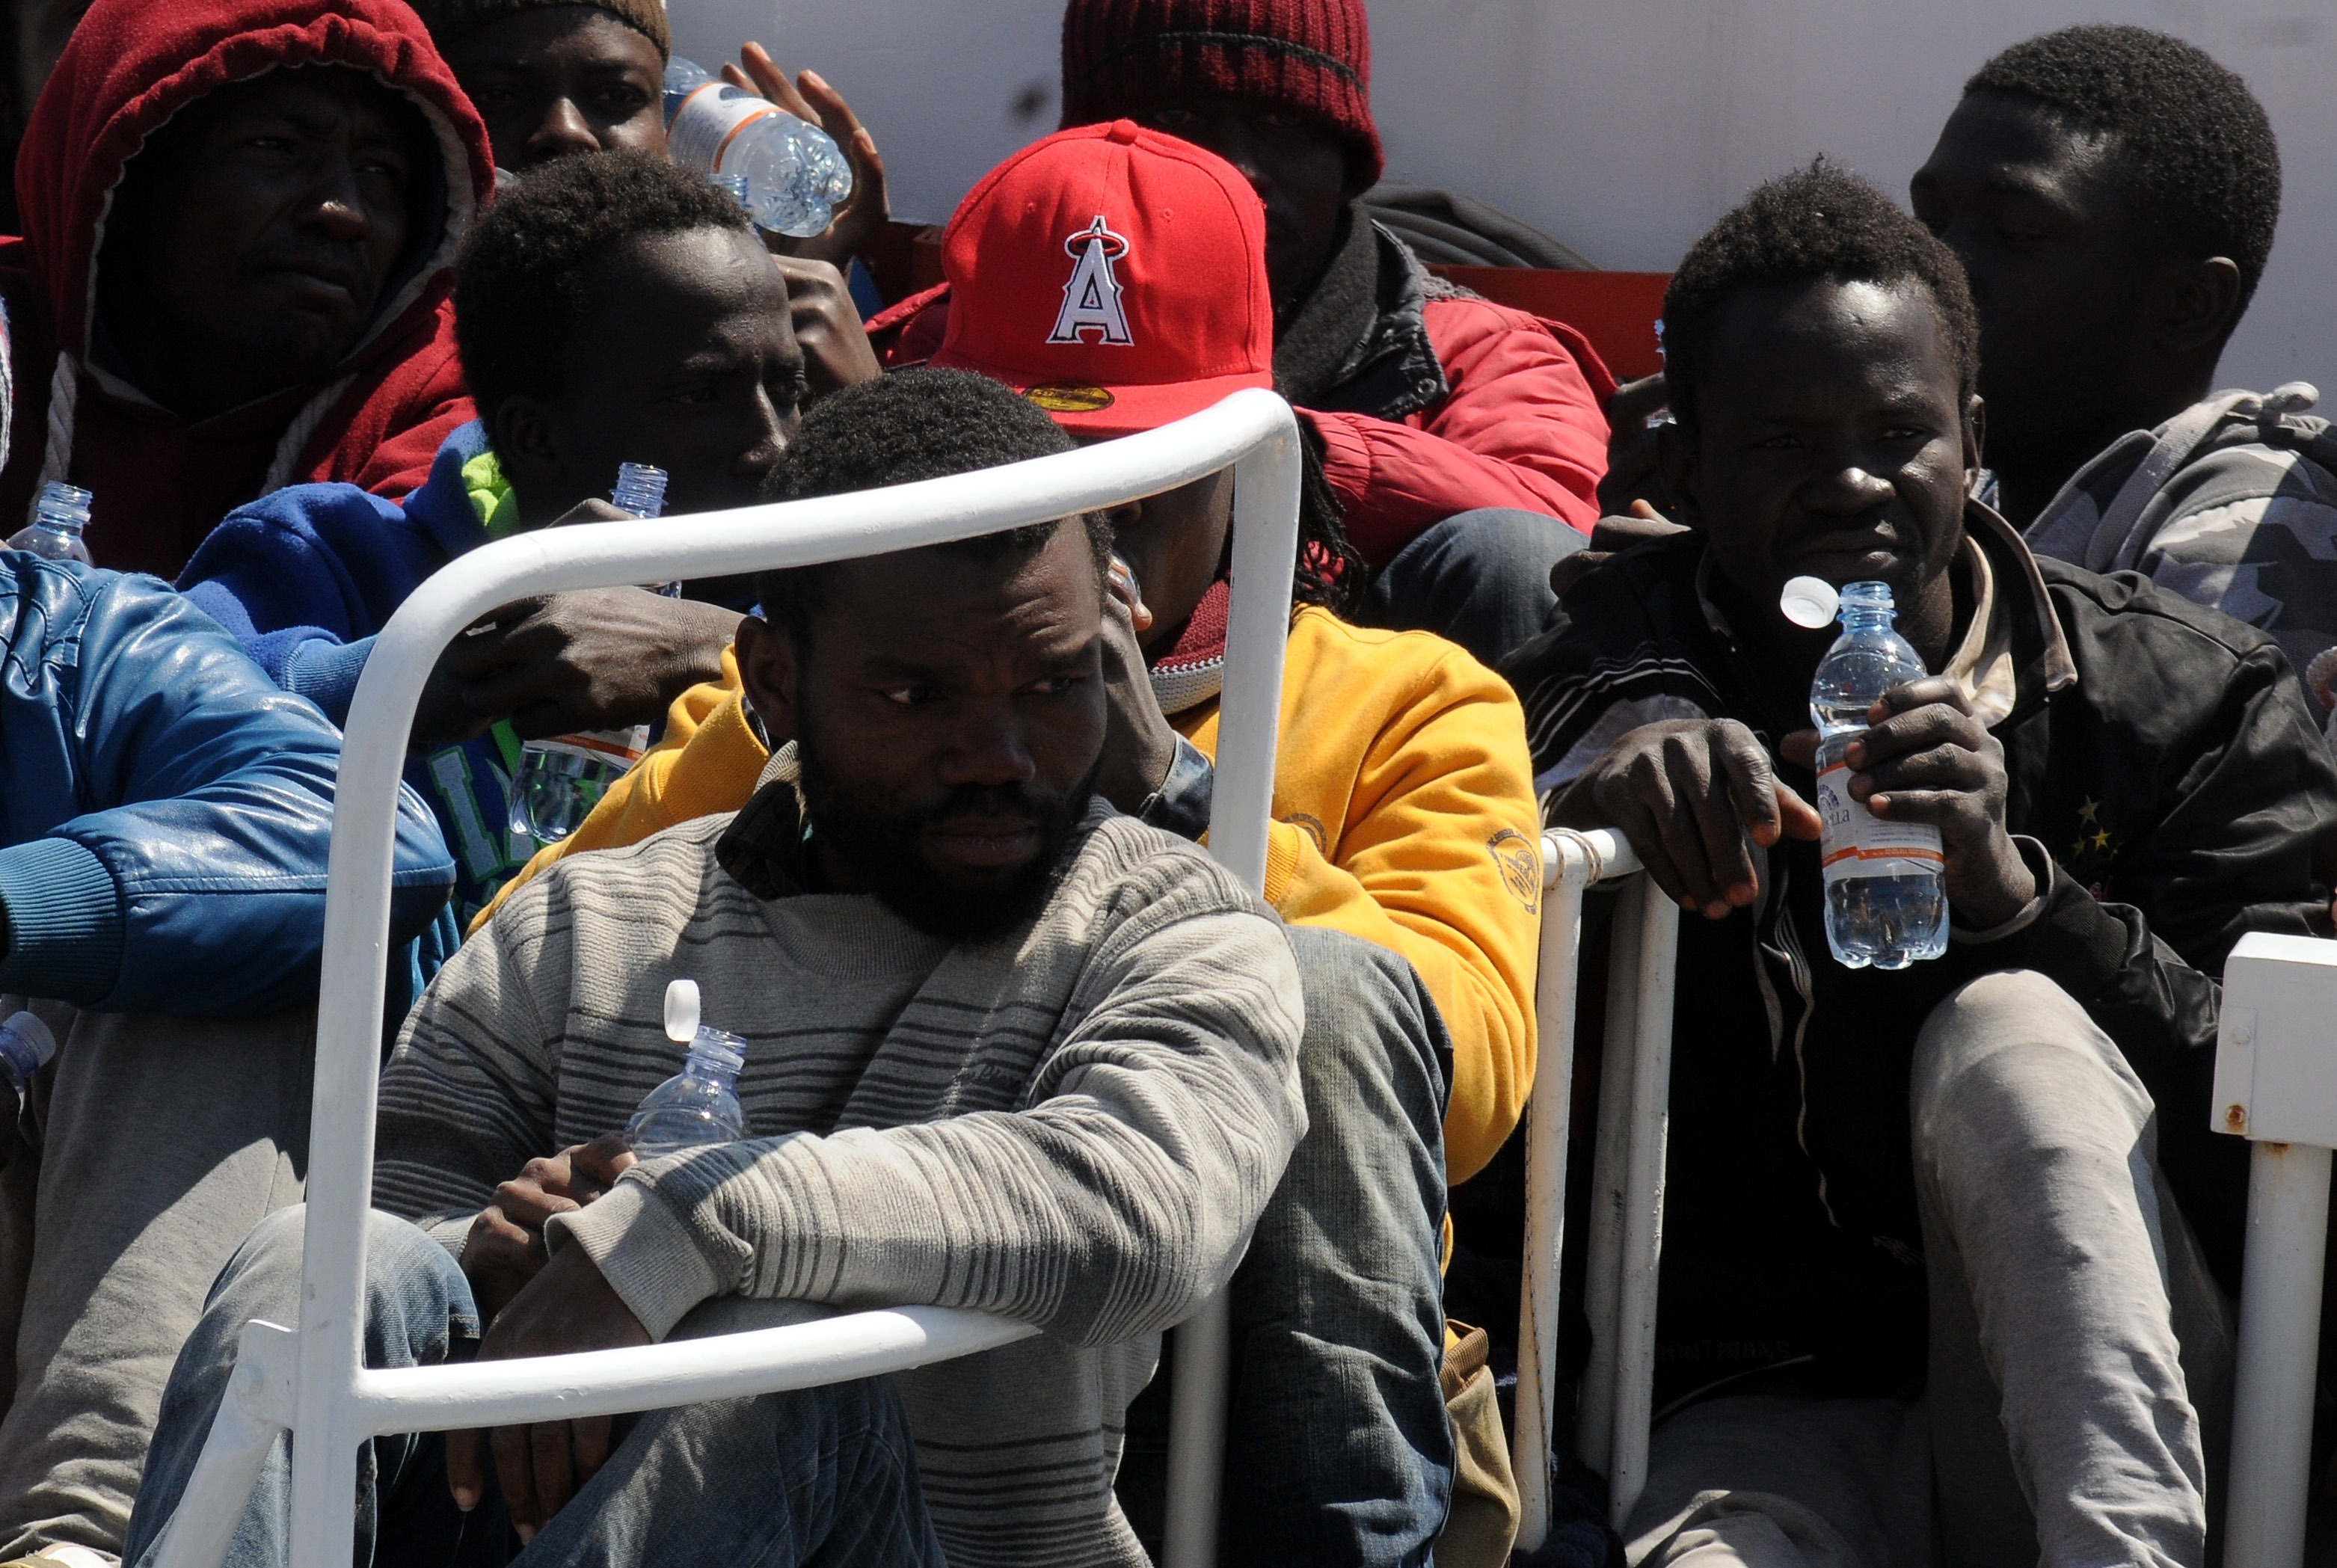 Surviving migrants arrive at Palermo's harbour, Italy, after being rescued at sea